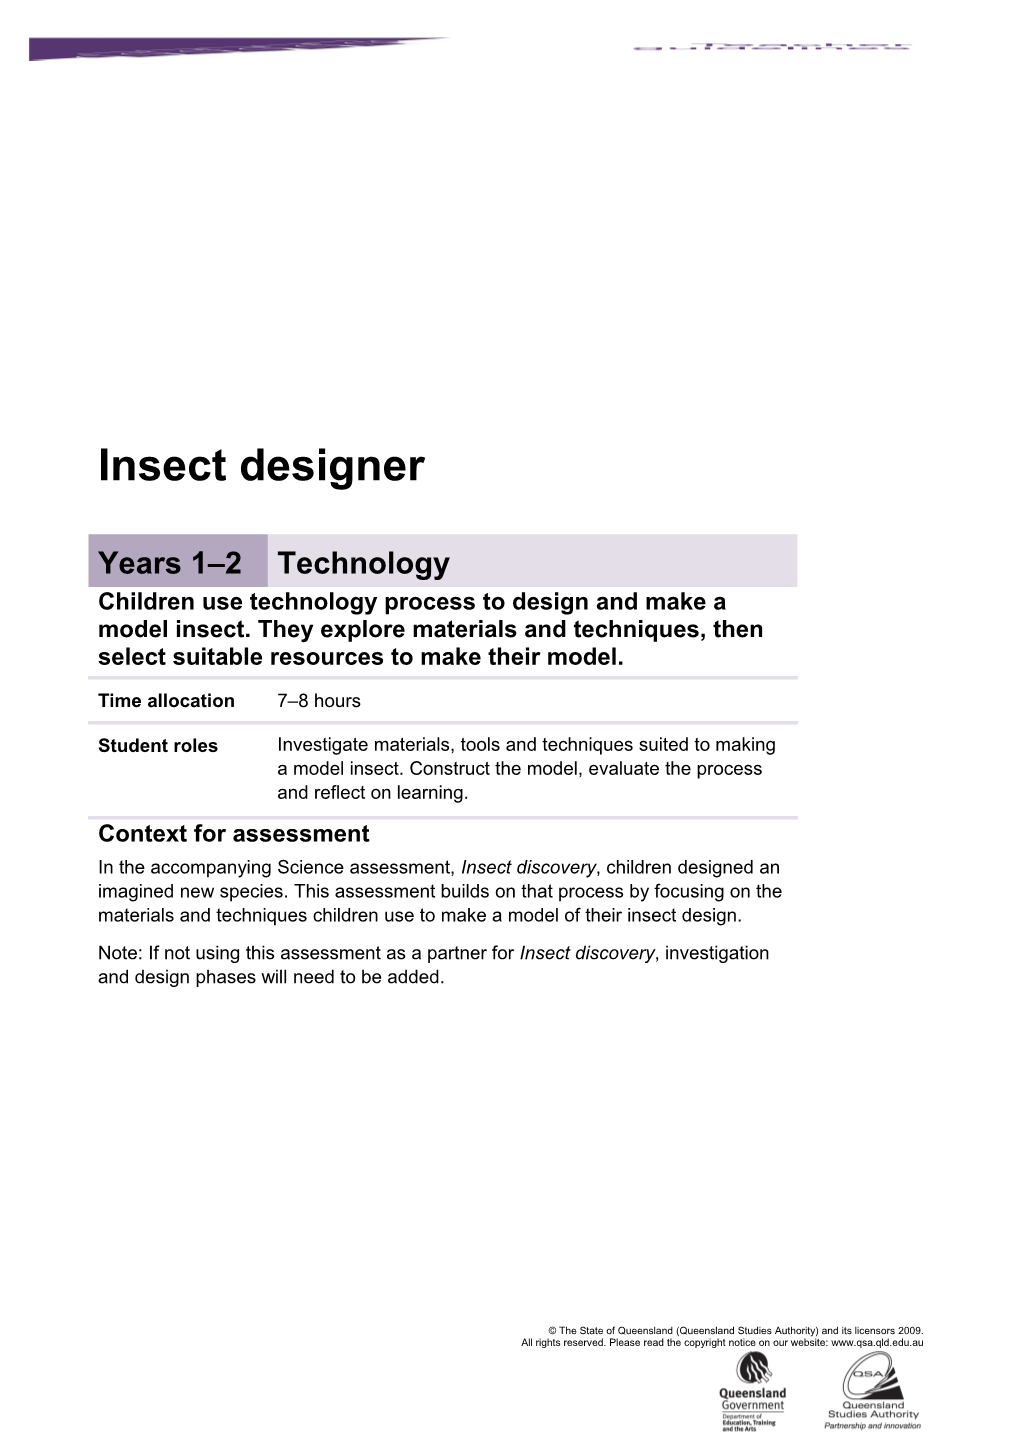 Year 2 Technology Assessment Teacher Guidelines | Insect Designer | Queensland Essential Learnings And Standards